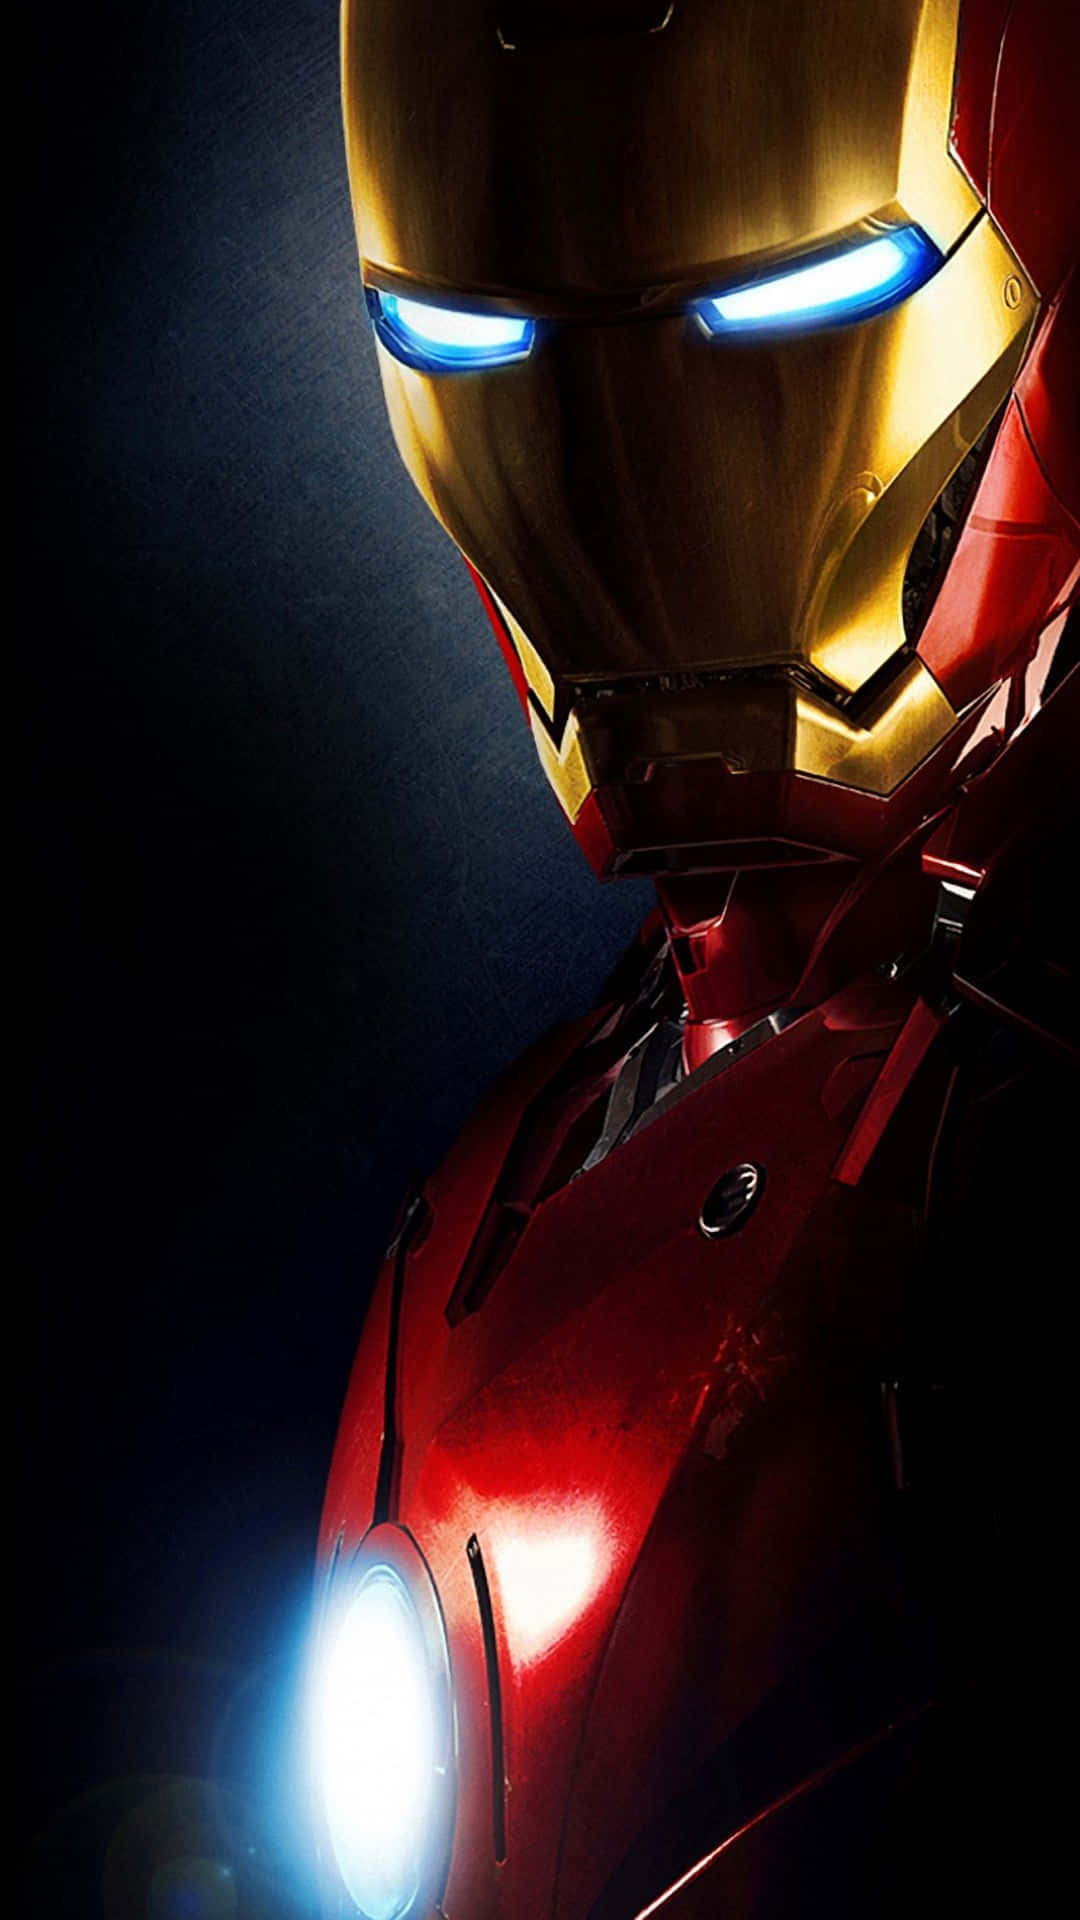 Mobile wallpaper: Iron Man, Comics, Superhero, 504425 download the picture  for free.